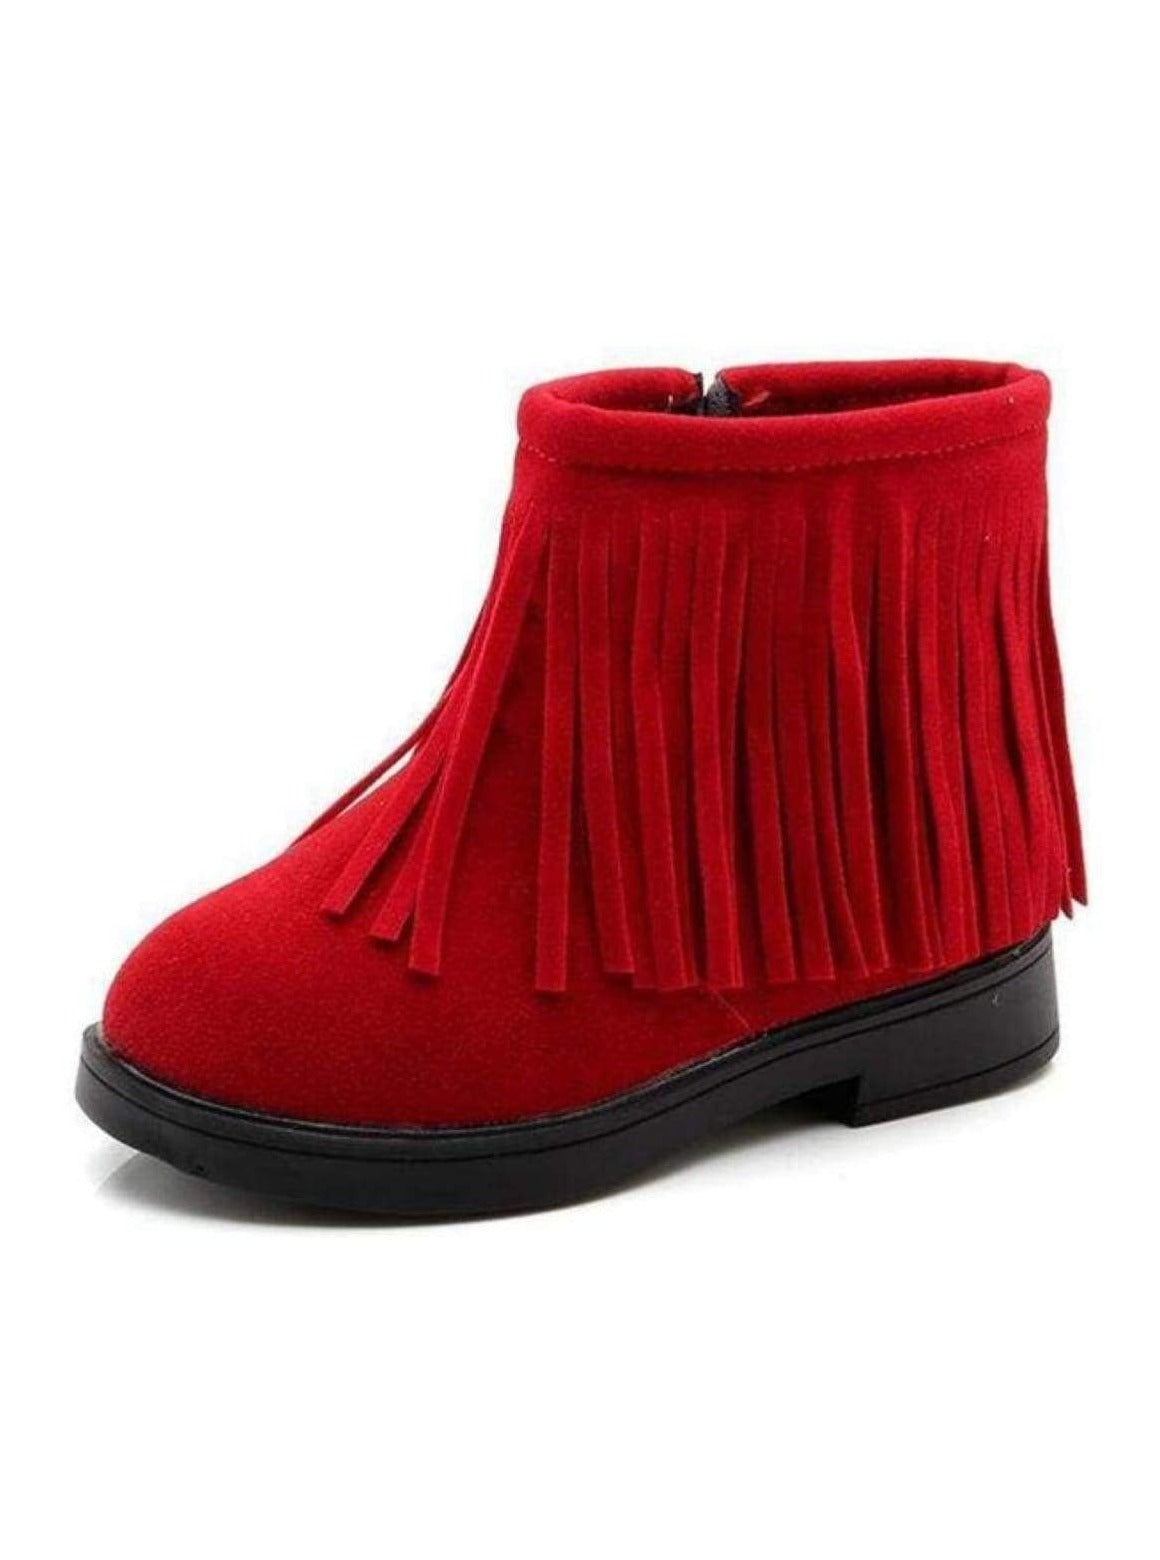 Girls Bohemian Suede Fringe Ankle Boots 